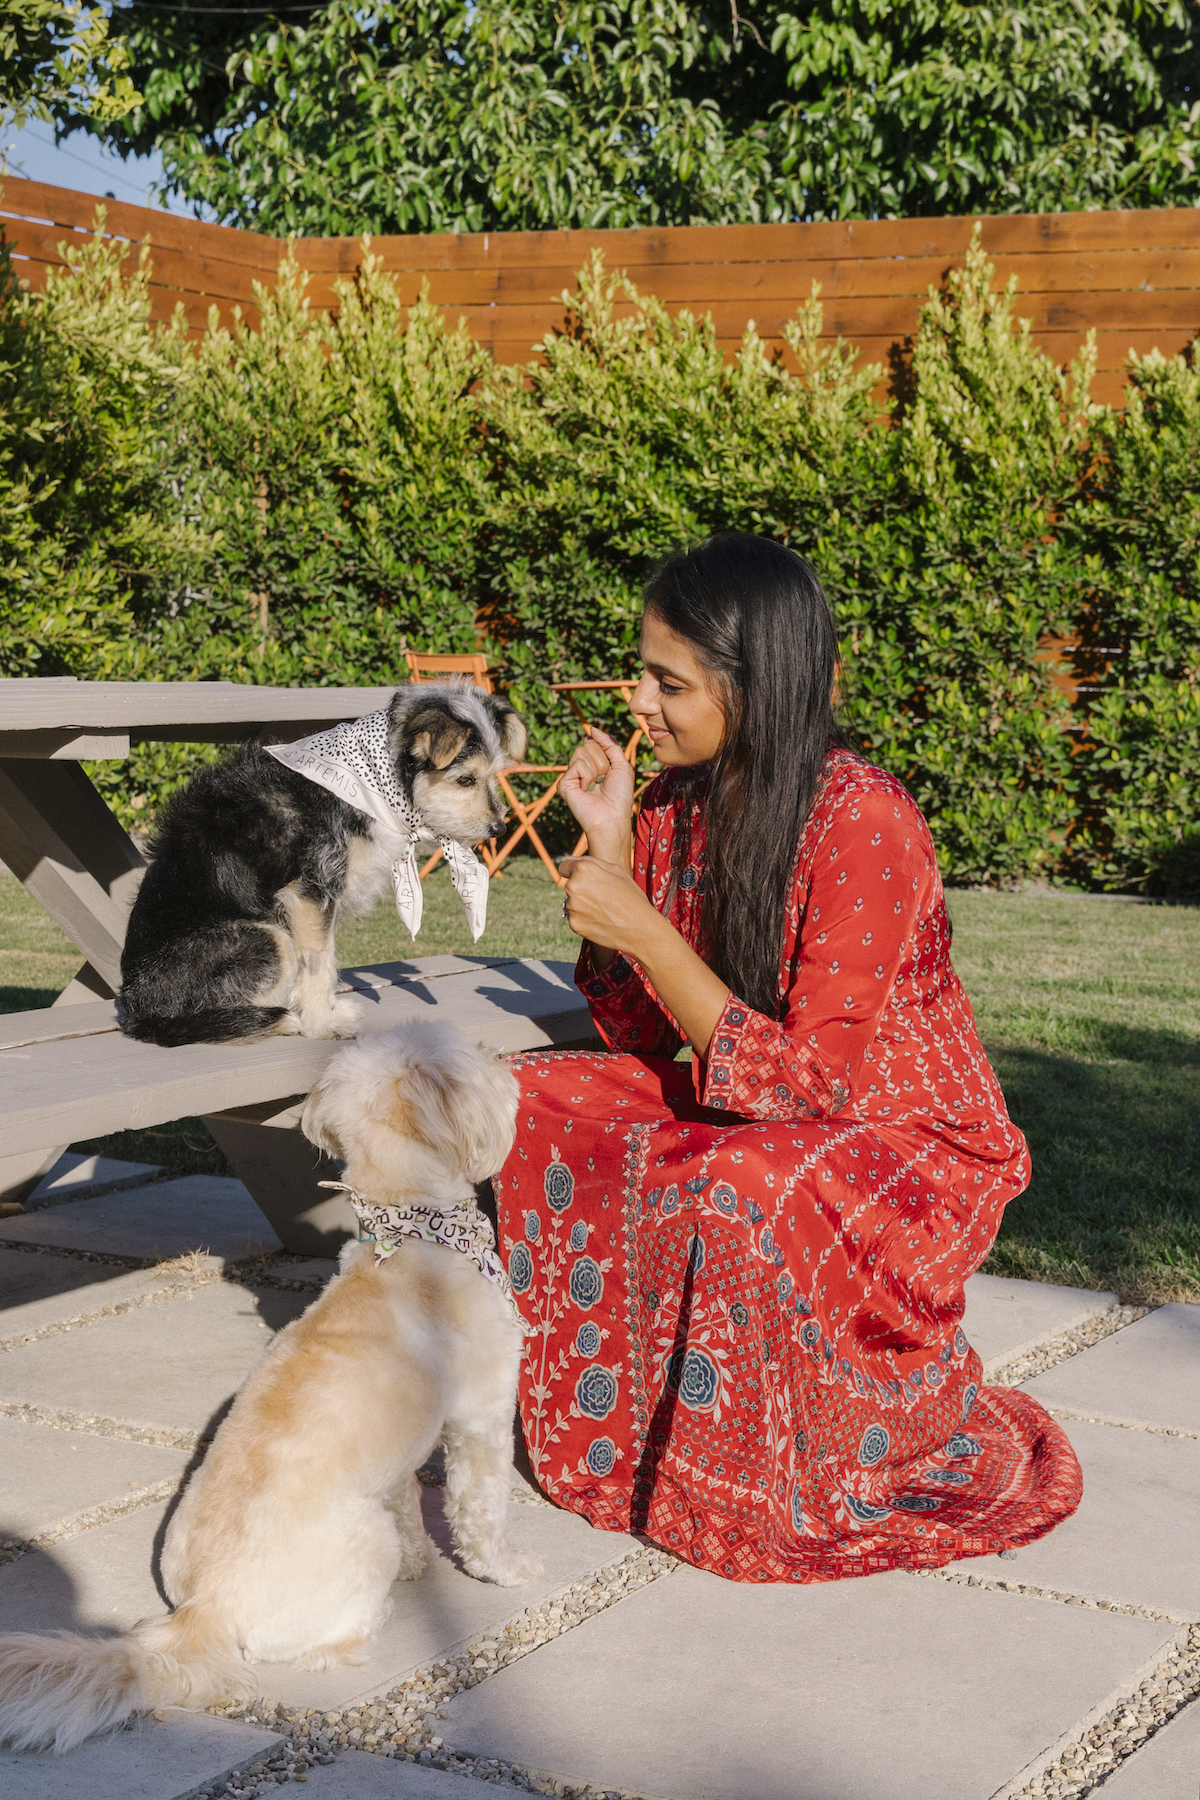 Aishwarya Iyer, Founder & CEO of Brightland, at home with her two dogs, photographed by Hannah Choi for Argos & Artemis.